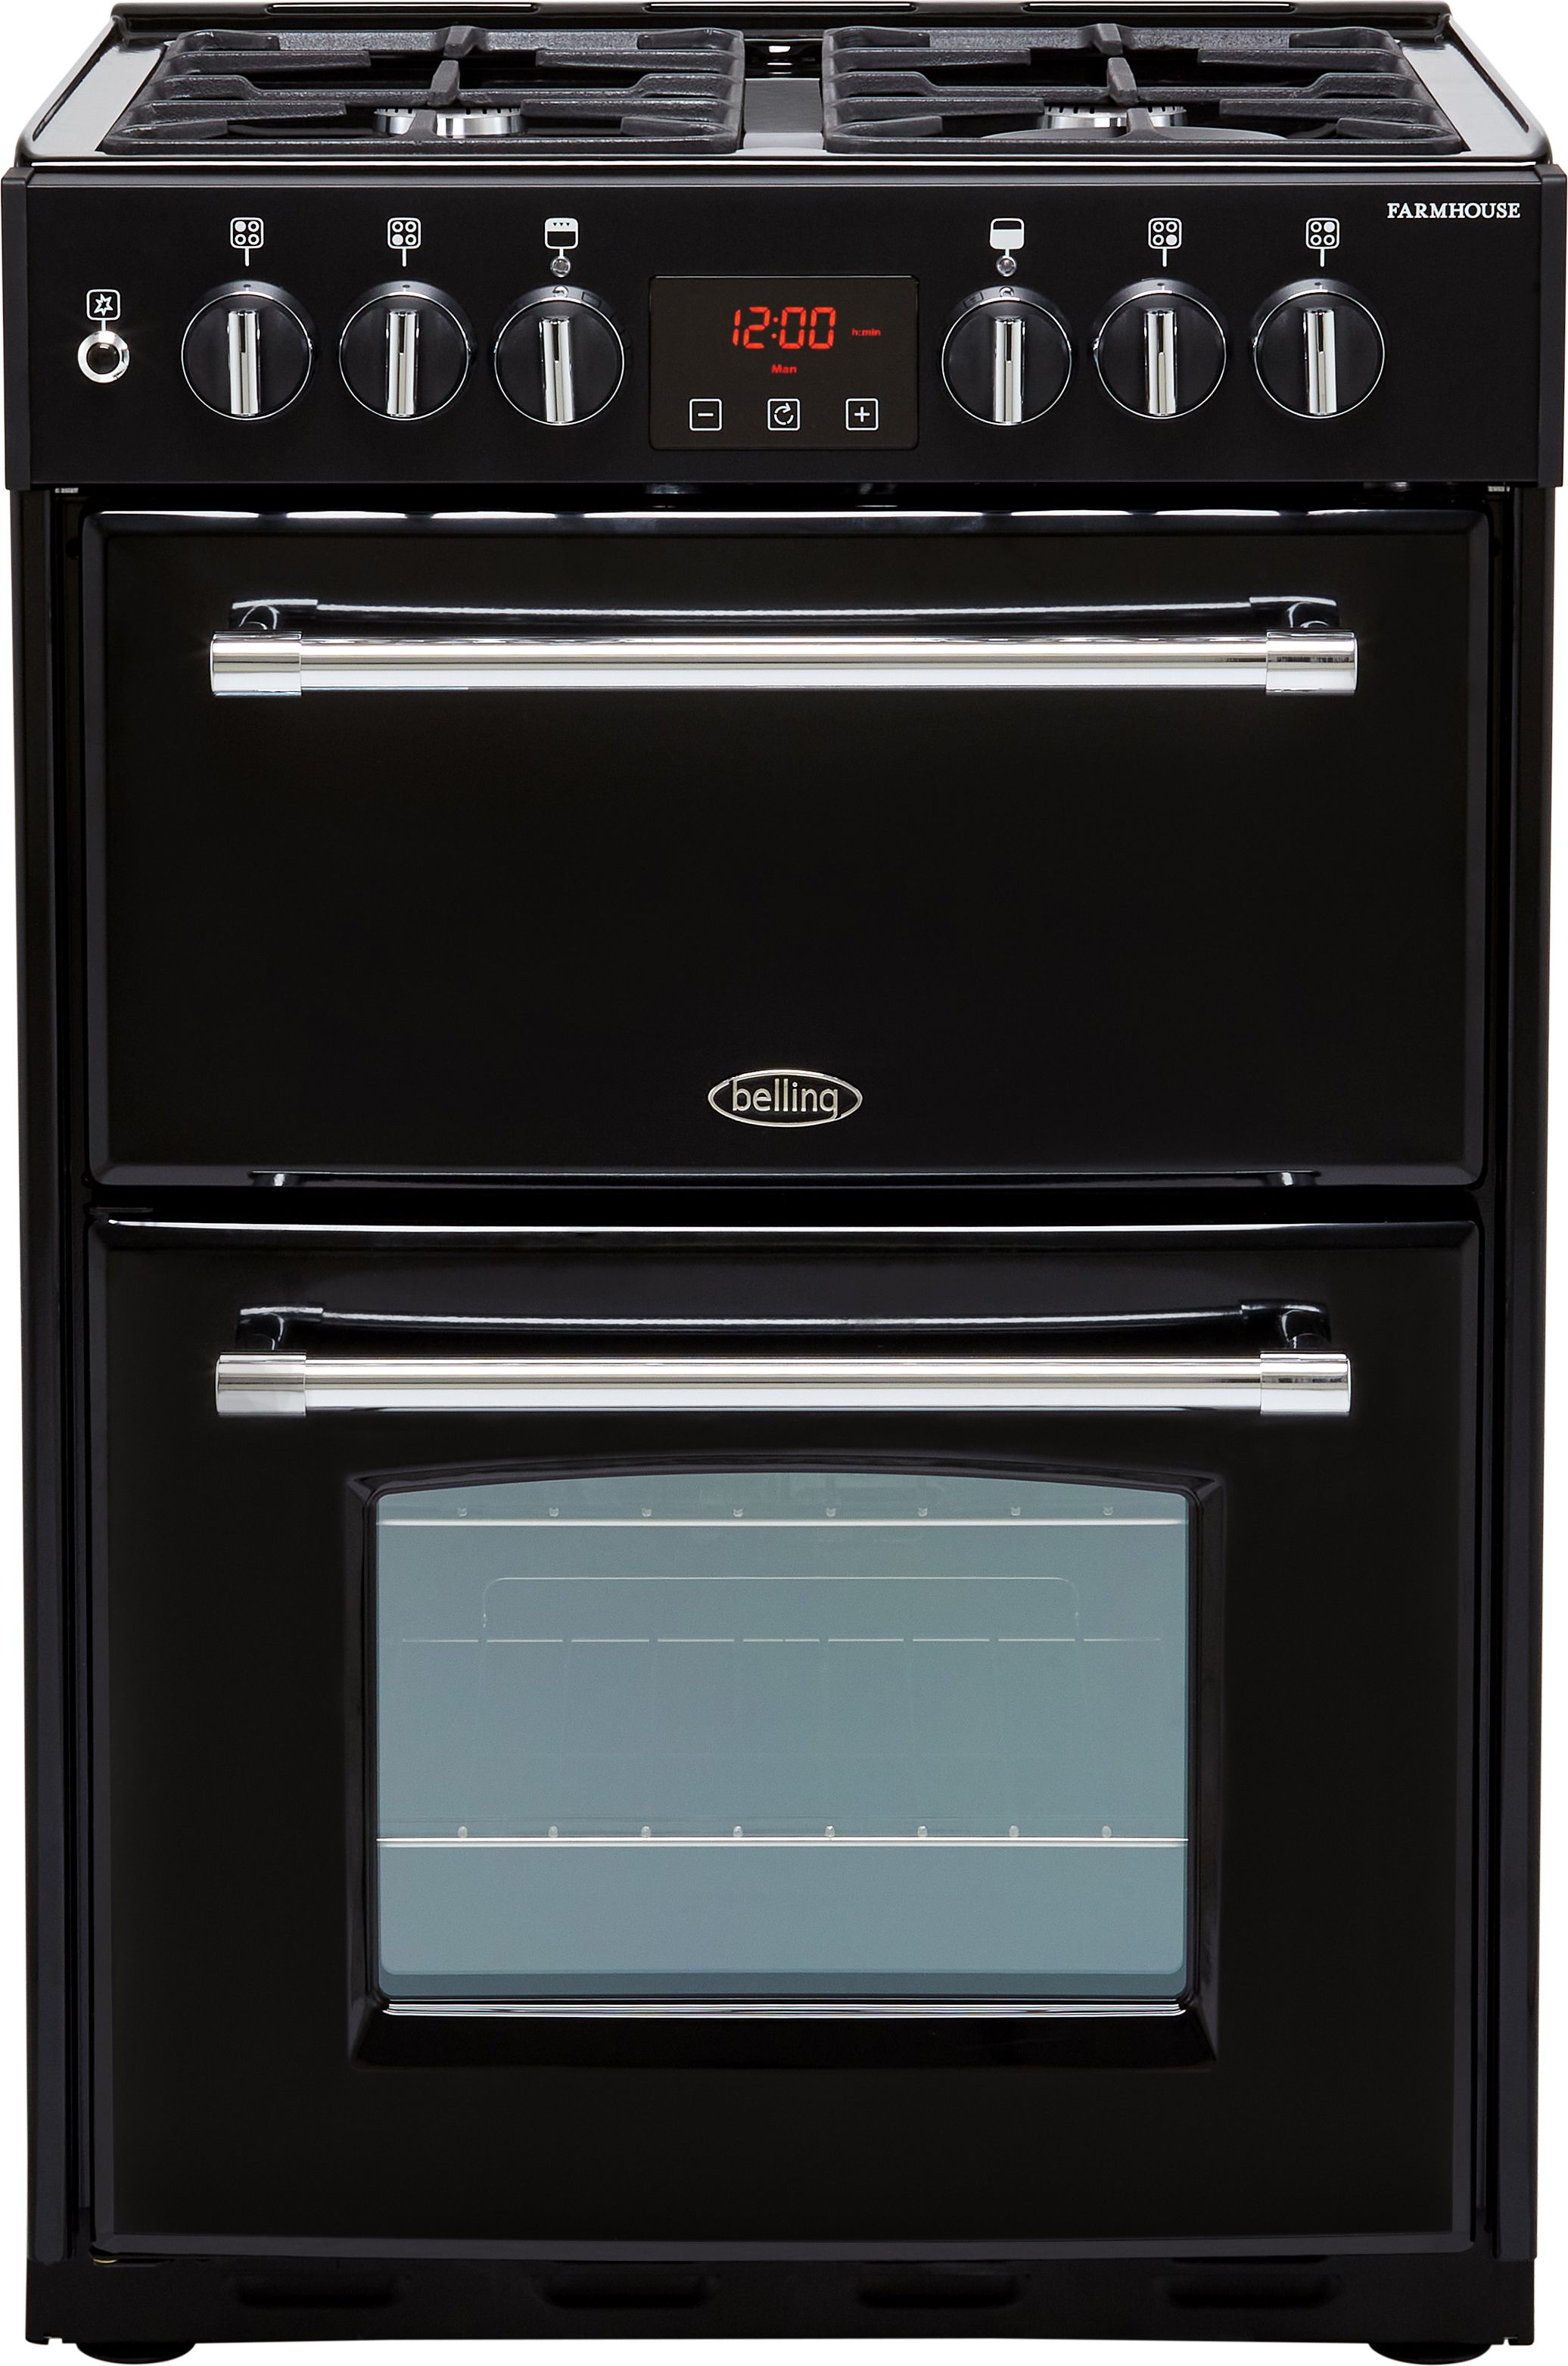 Belling Farmhouse60DF 60cm Freestanding Dual Fuel Cooker - Black - A/A Rated, Black